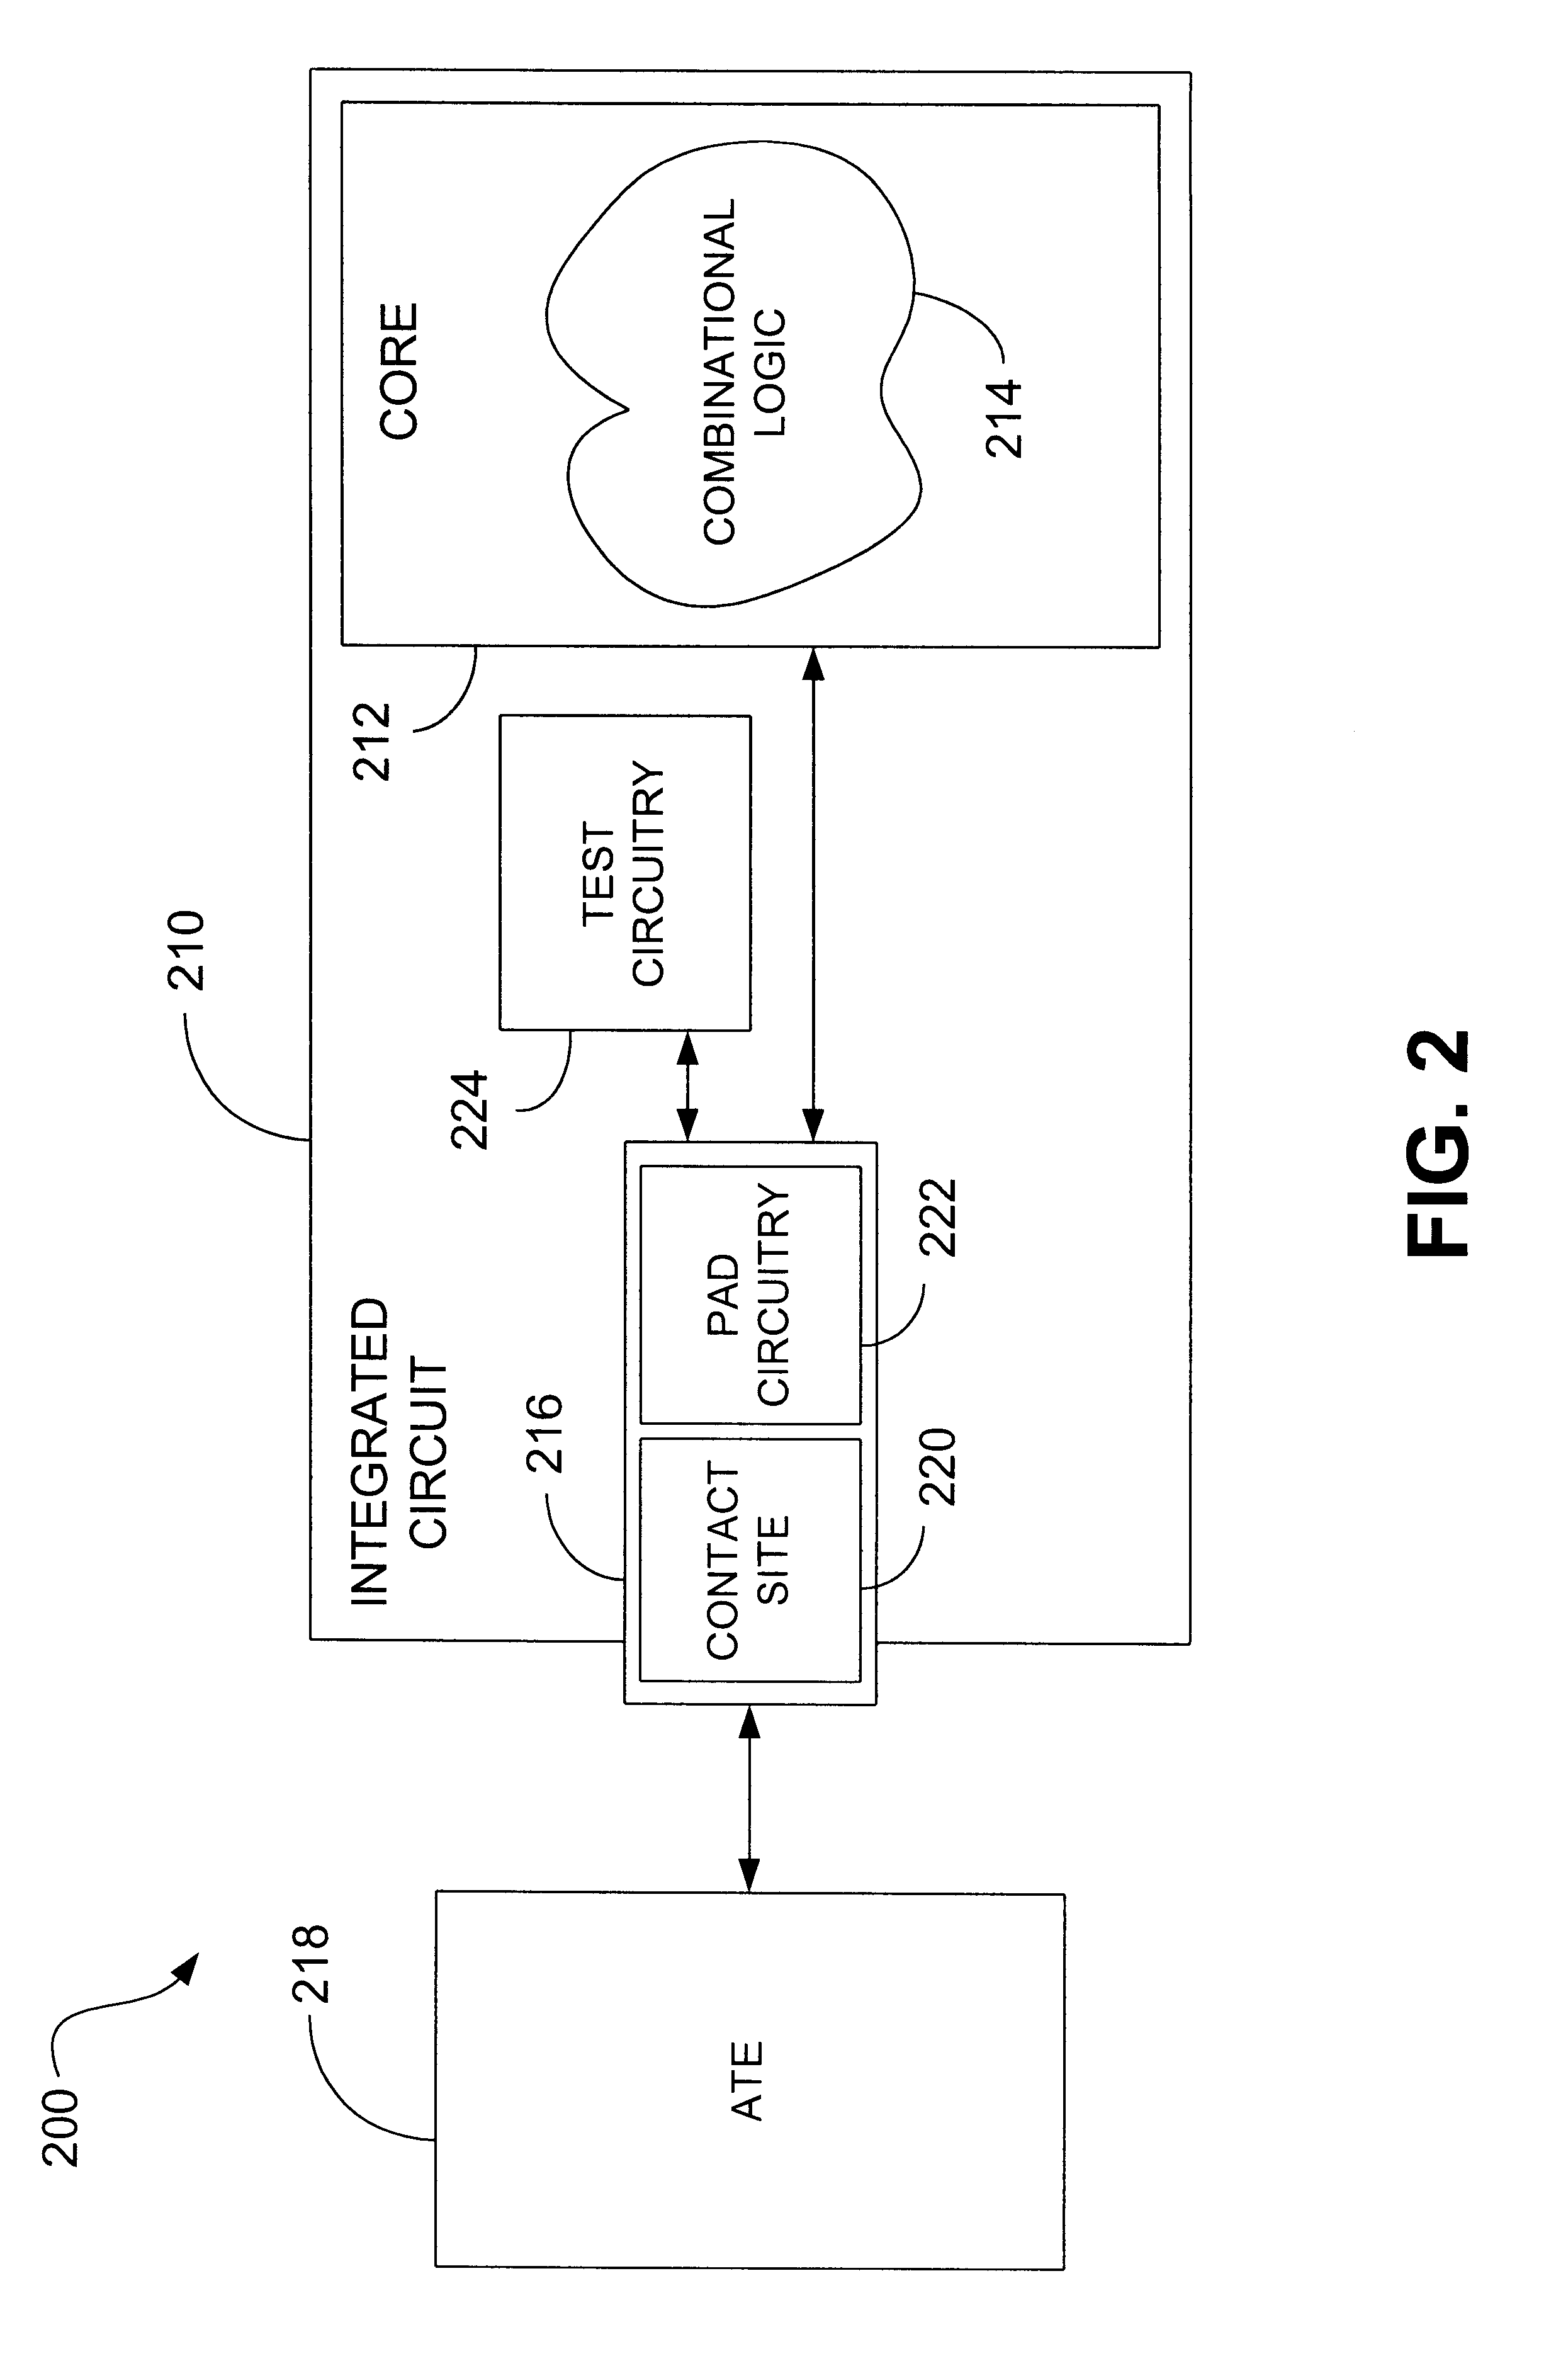 Systems and methods for facilitating testing of pad drivers of integrated circuits